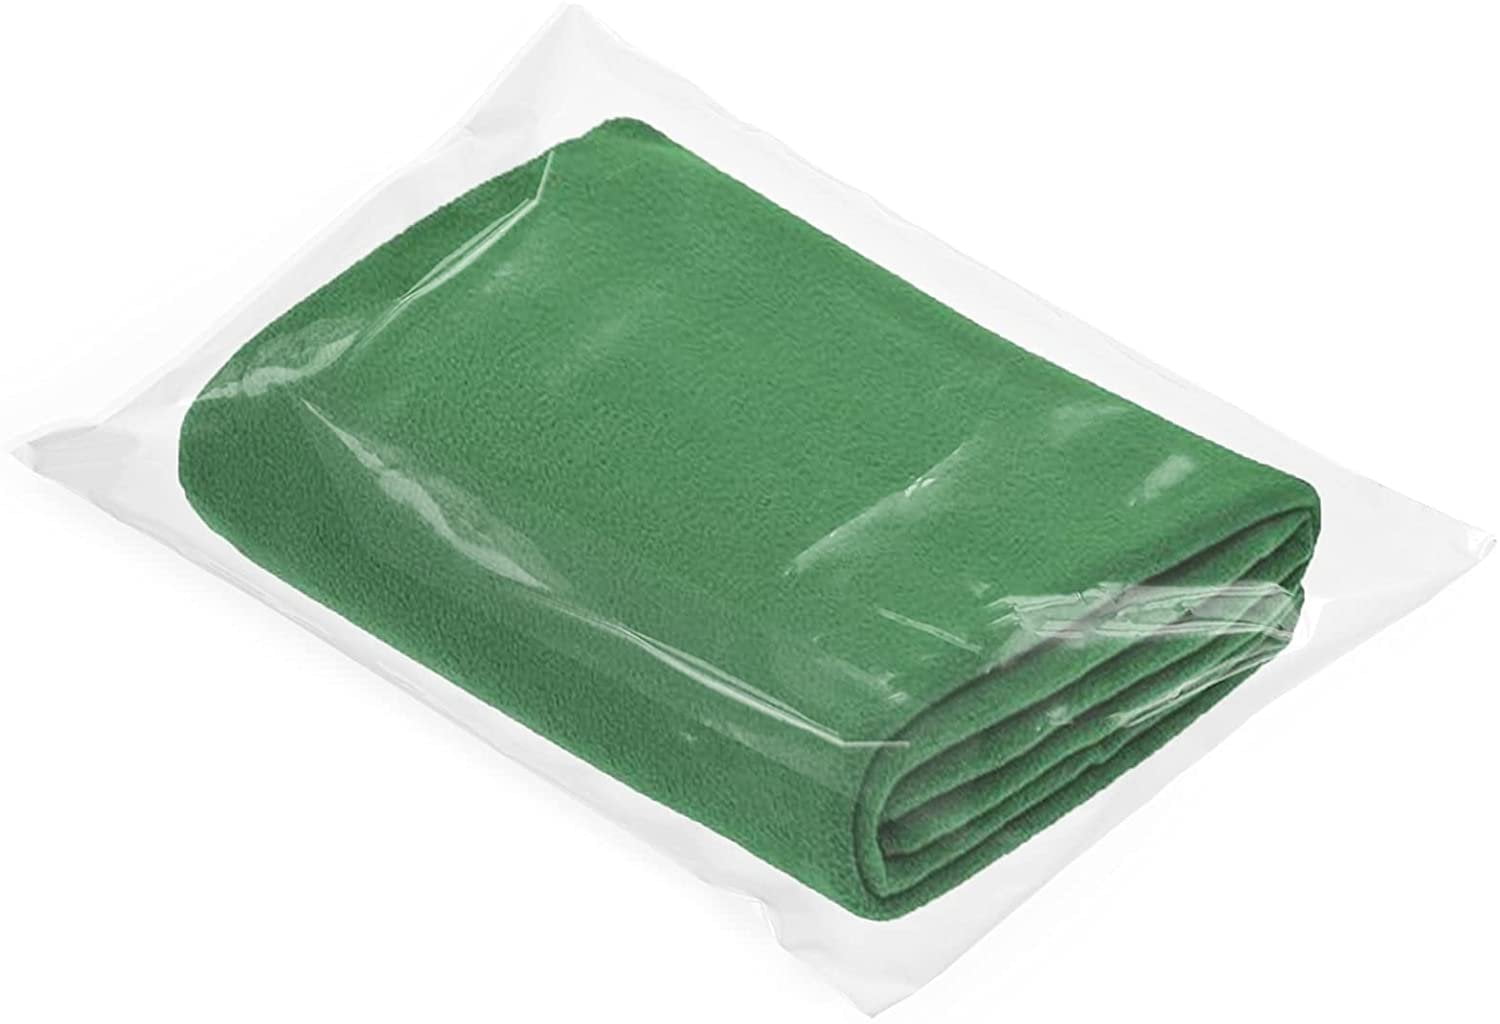 Amazon.com: APQ Pack of 1000 Clear Zipper Bags 12 x 12. Seal Top Polyethylene  Bags 12x12. Thickness 2 mil. Plastic Poly Bags for Packing and Storing.  Ideal for Industrial, Food Service, Health